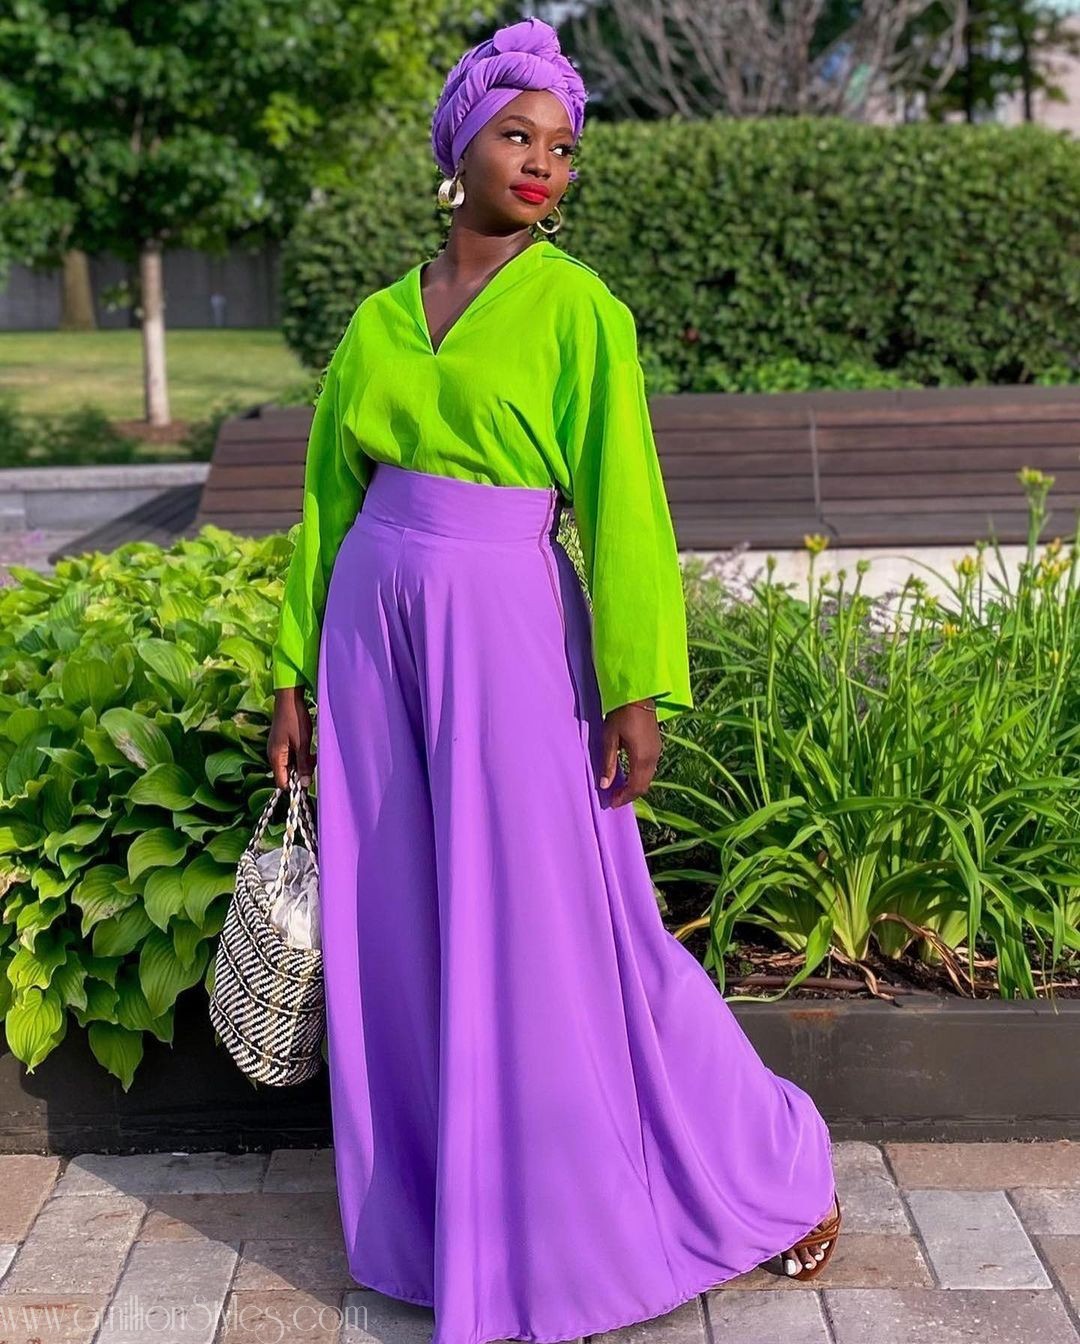 These Gorgeous Women Show Us How To Pair Bright Colour Outfits